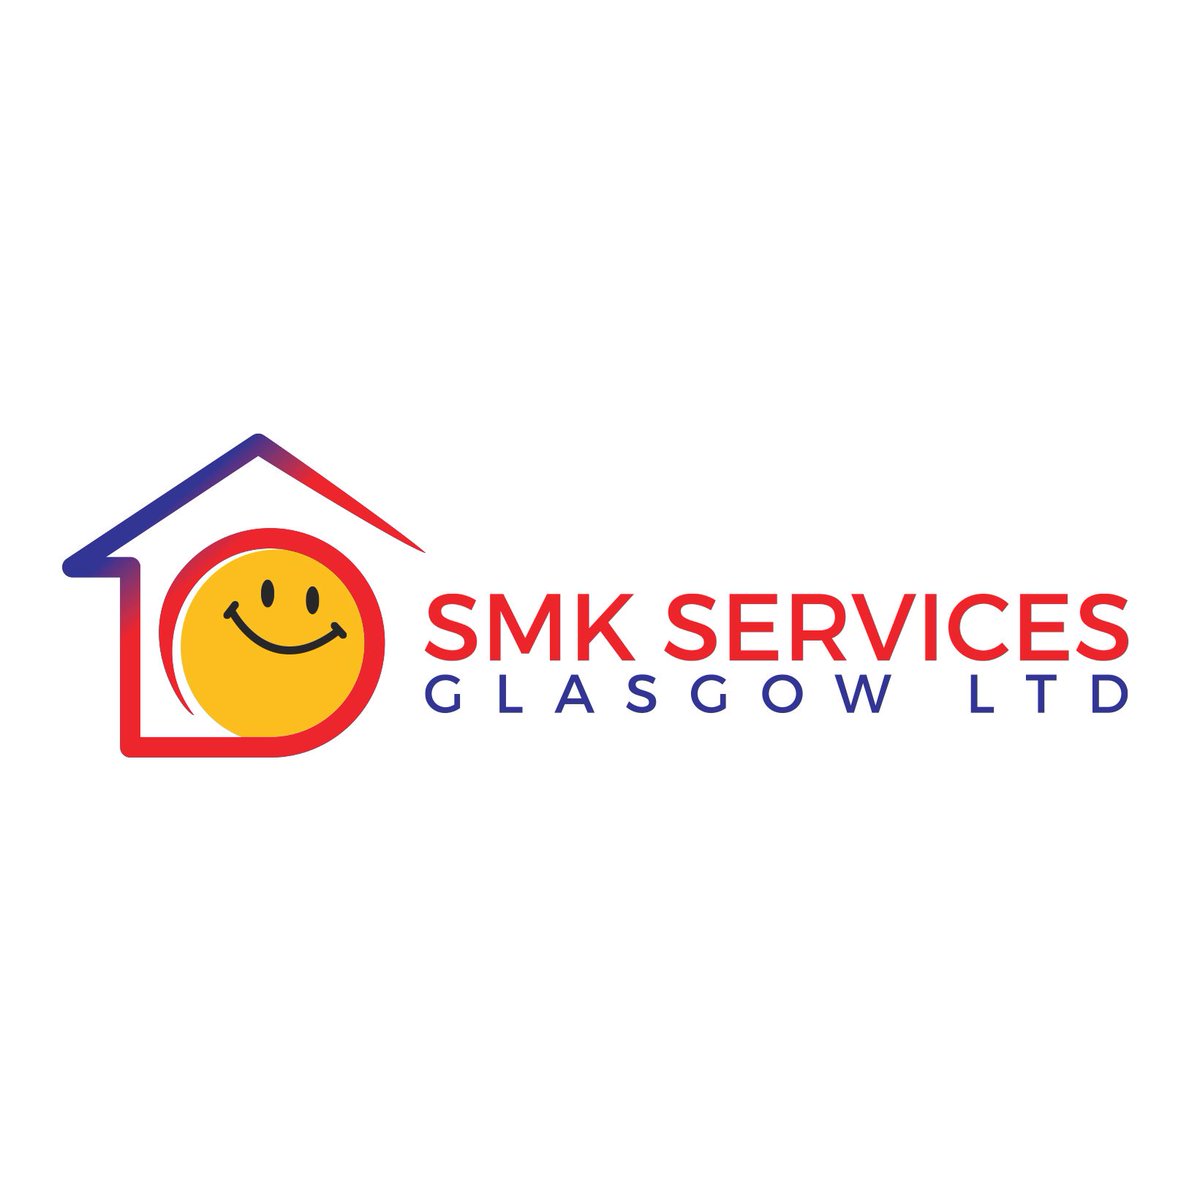 Logo creation for SMK Services. Logo set up & supplied along with 500 business cards for just £70. Logo supplied in vector form as well as jpeg versions for social media. #supernovagraffix 😎 #design #print #customworkwear #glasgow #scotland